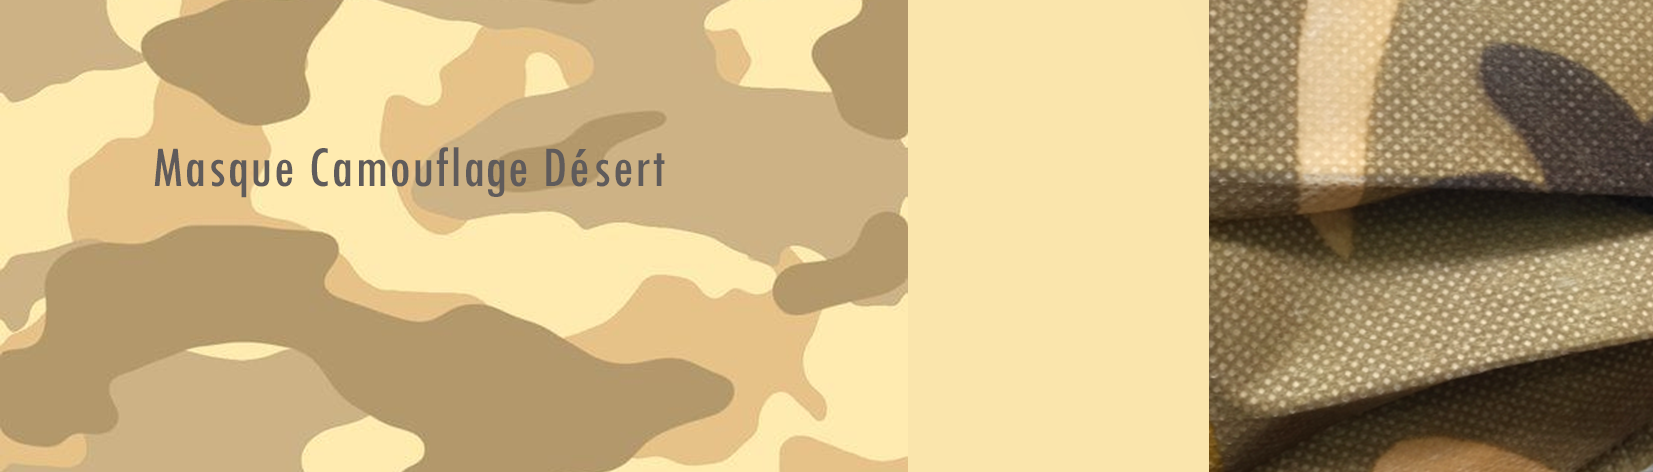 Masque couleur camouflage 2.png